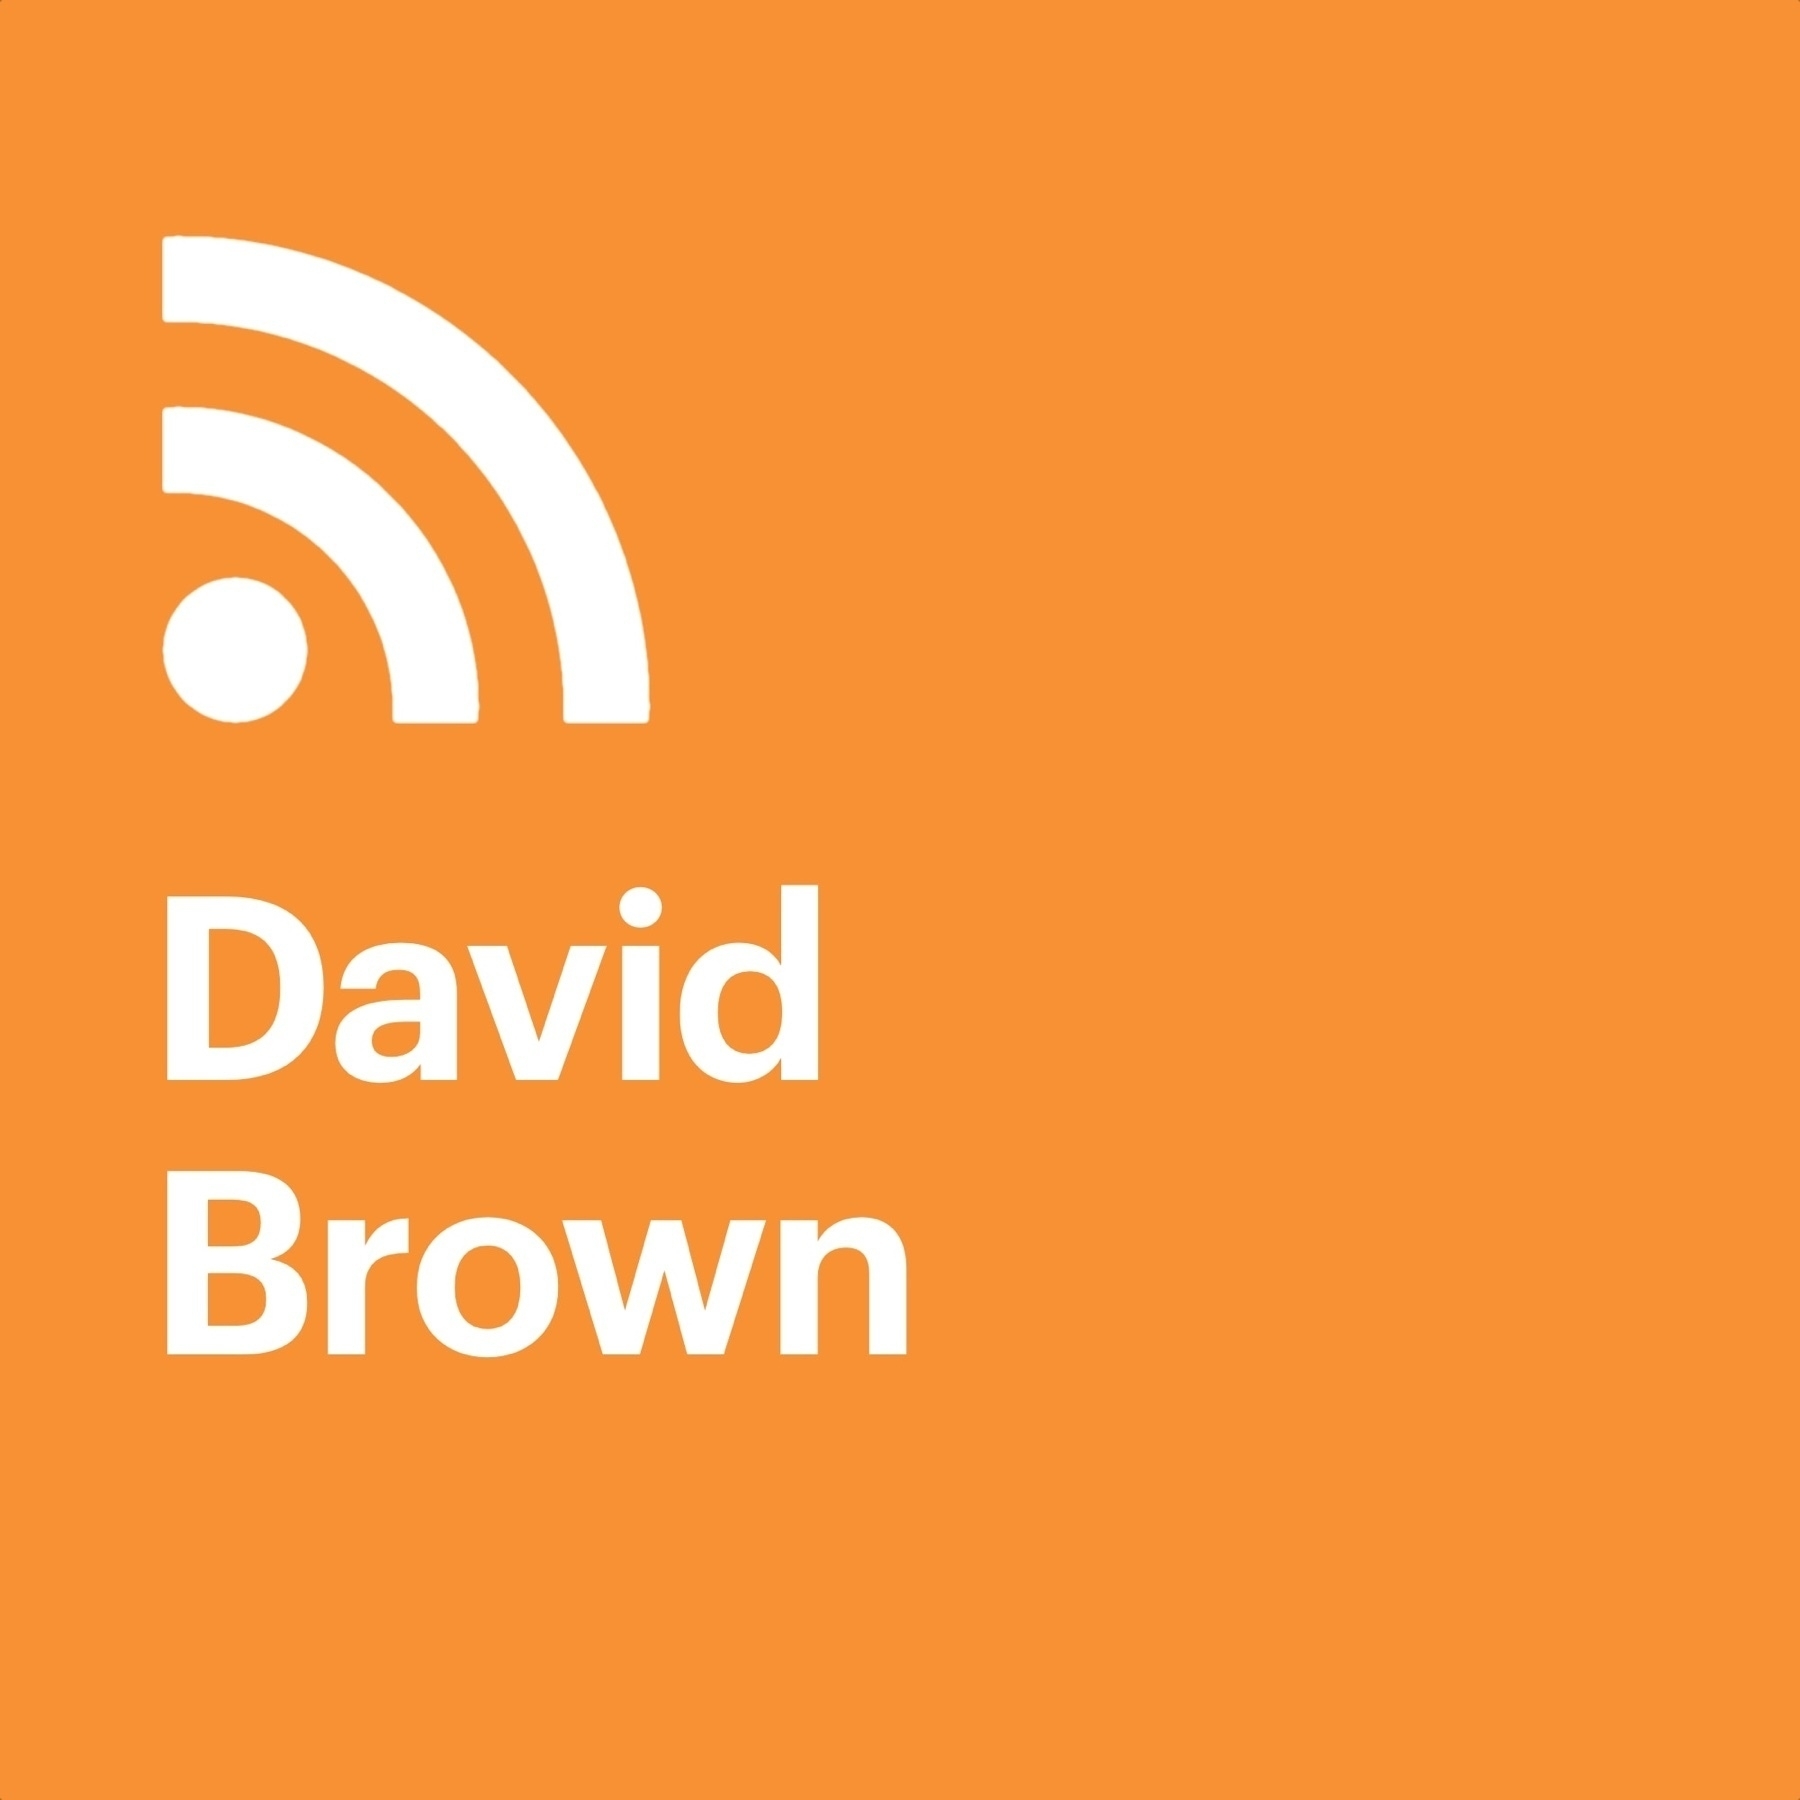 RSS icon with the name David Brown underneath it